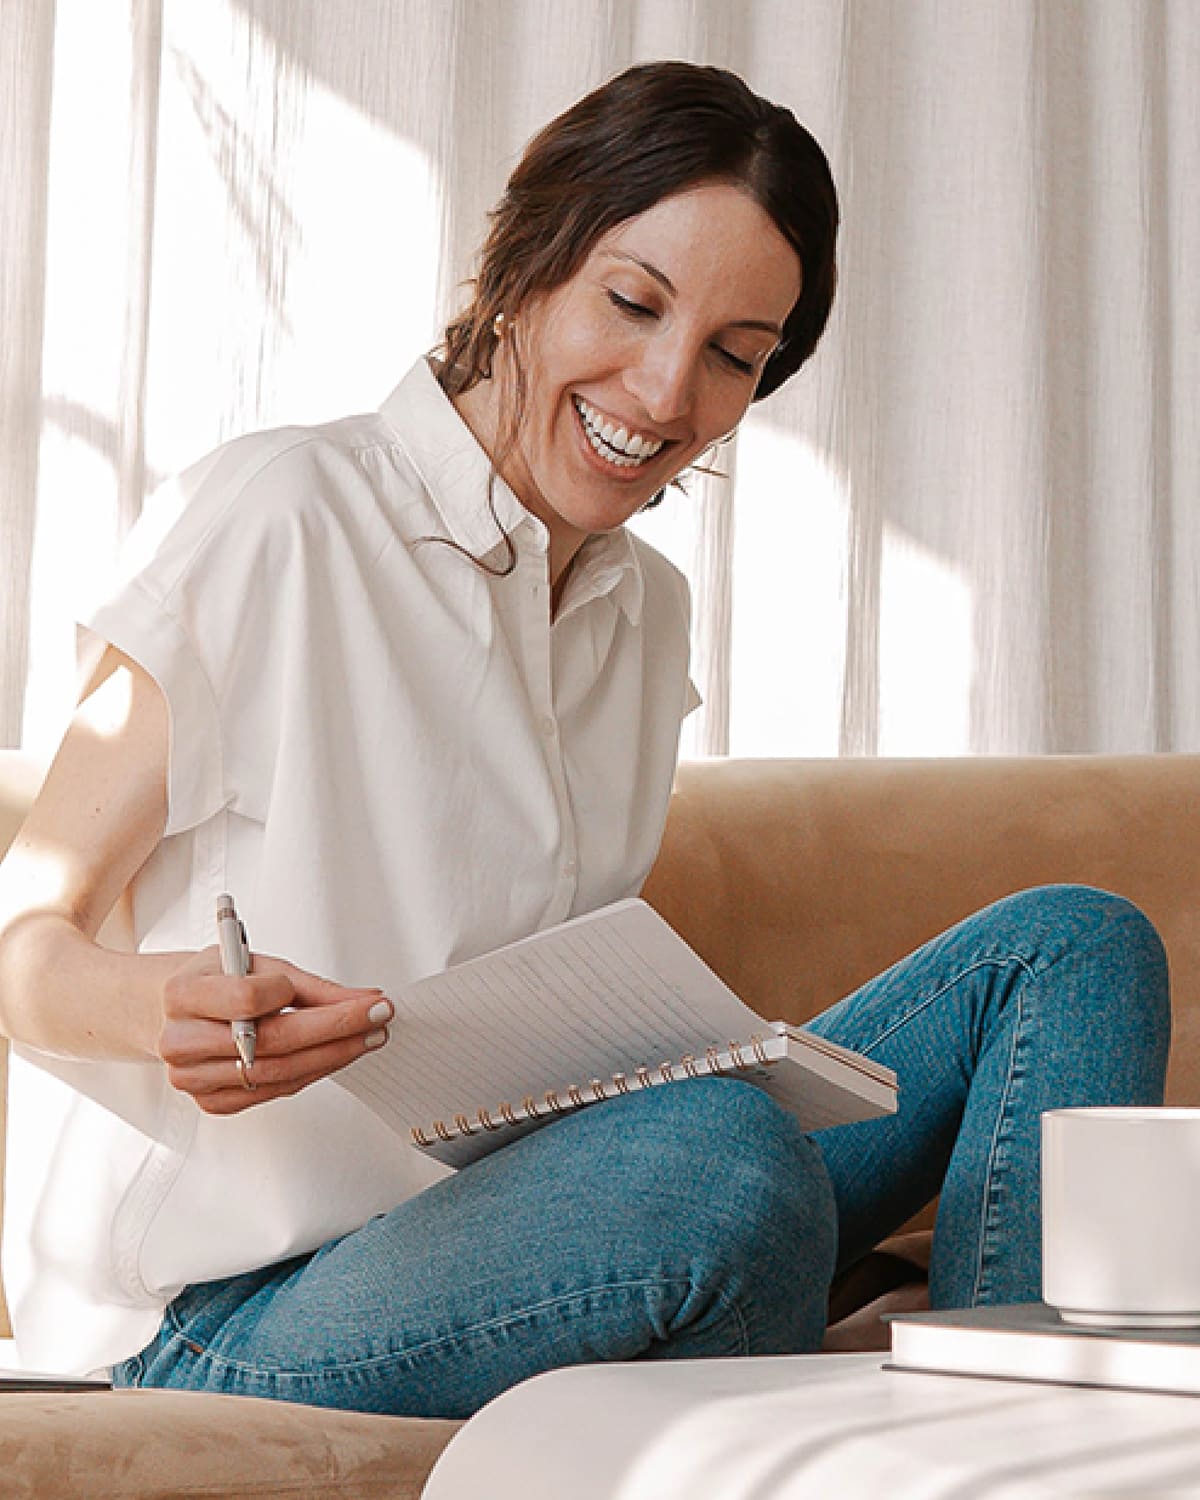 A woman in a white shirt looking at a journal.